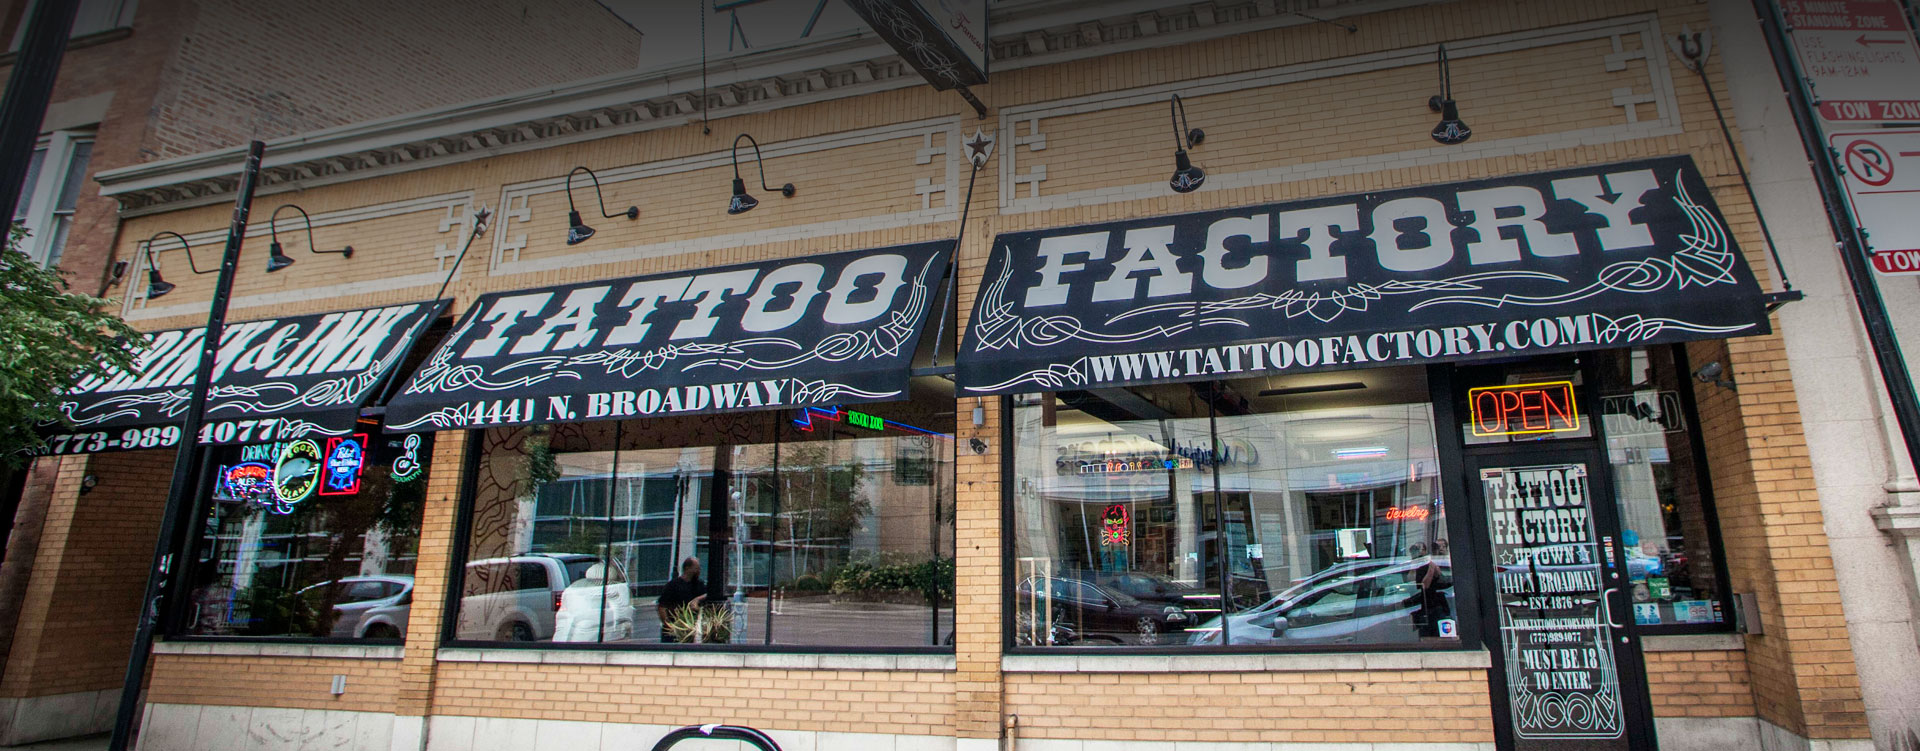 Tattoo Factory The Best In Tattos And Piercings Tattoo Factory